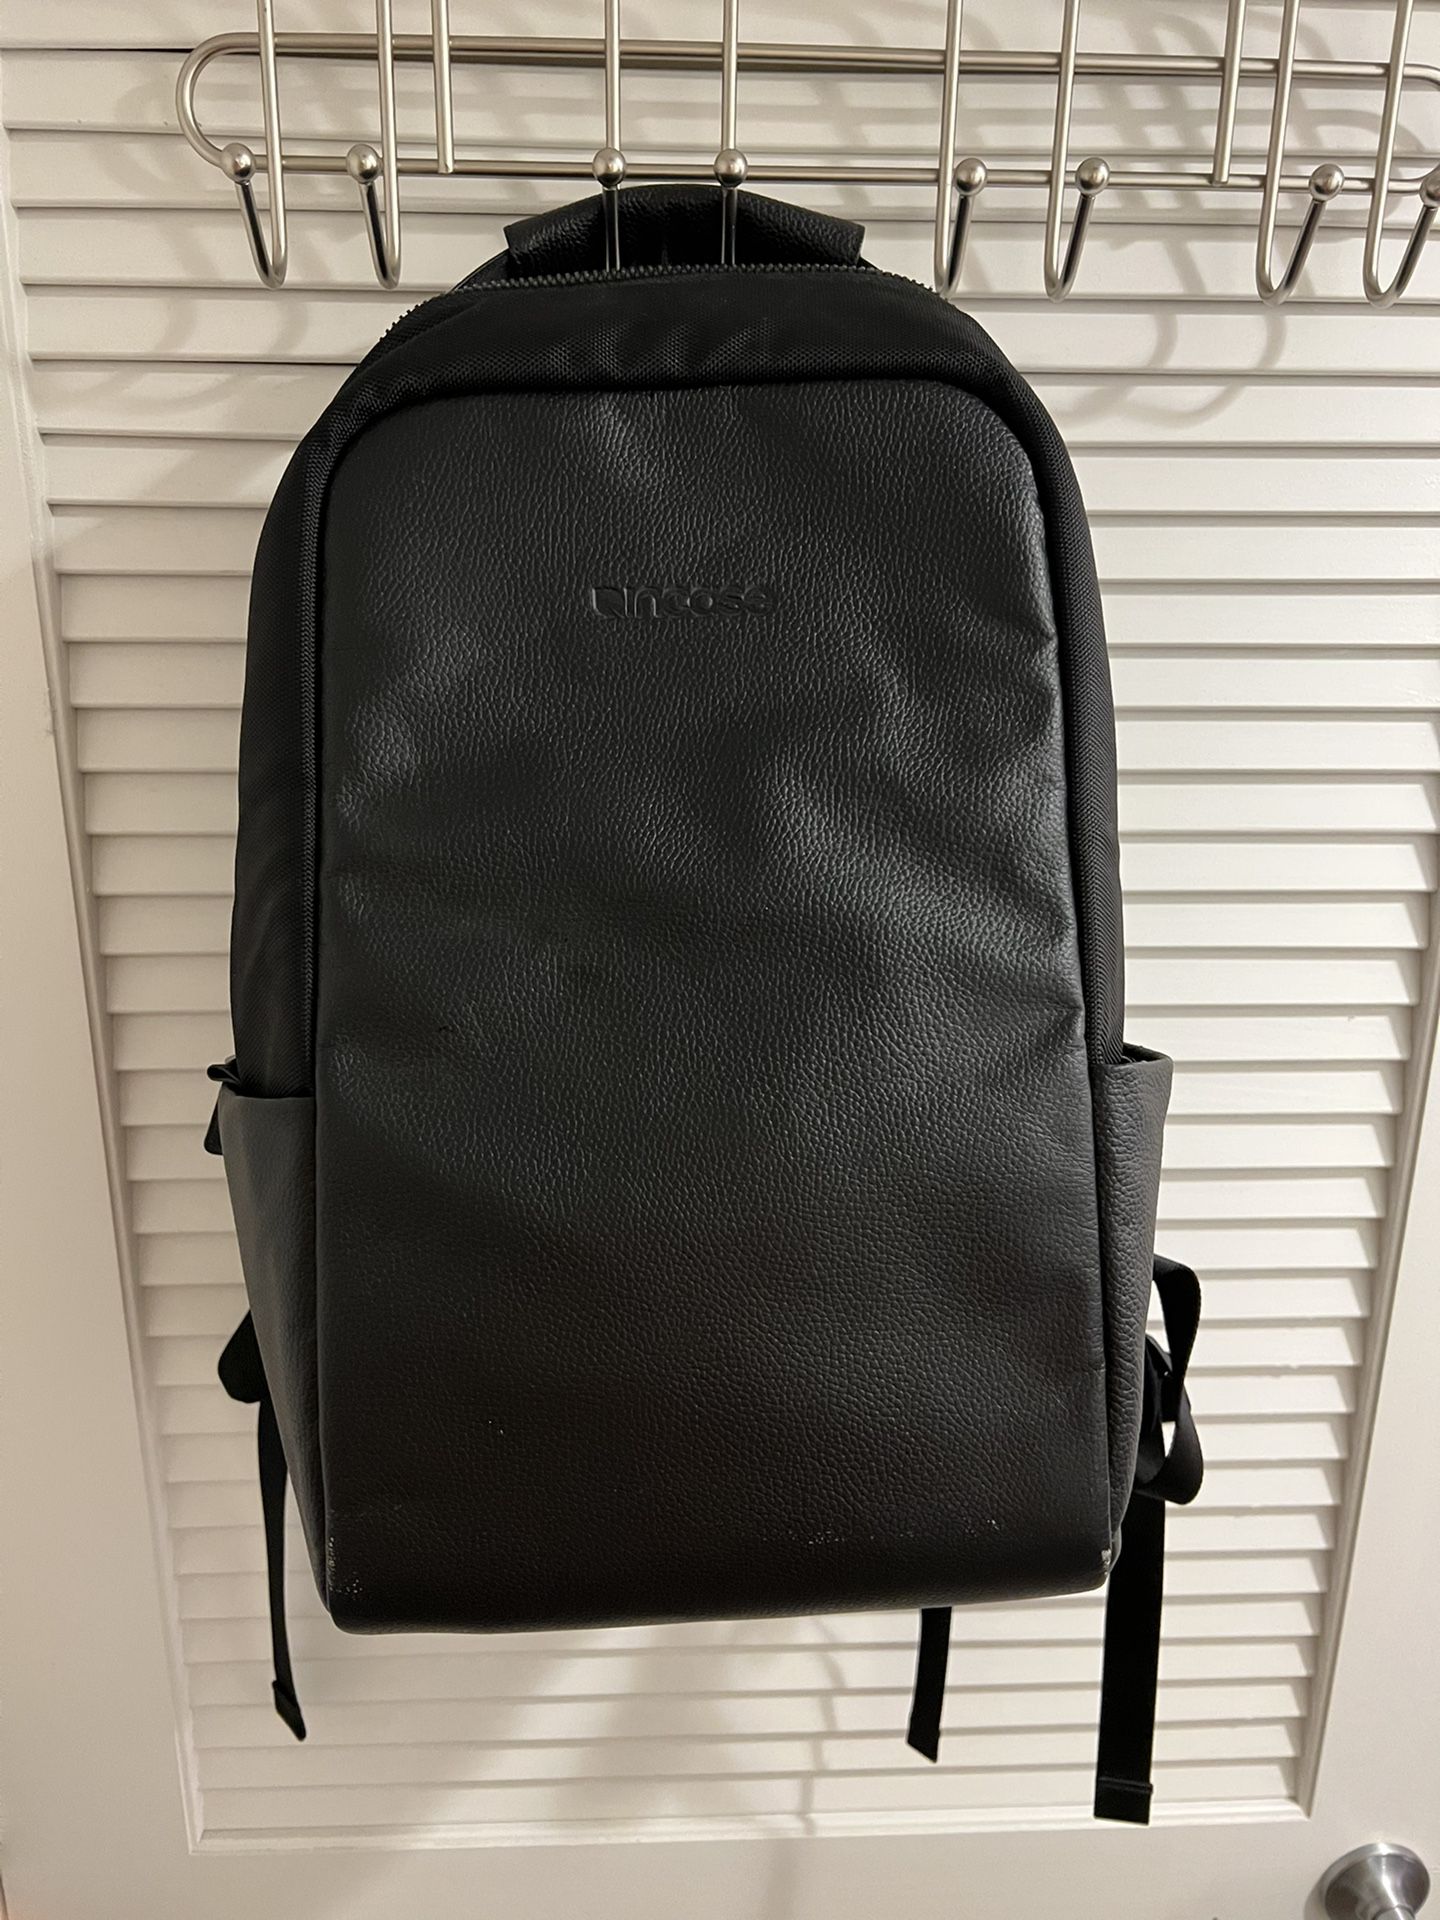 Incase Leather Laptop Backpack